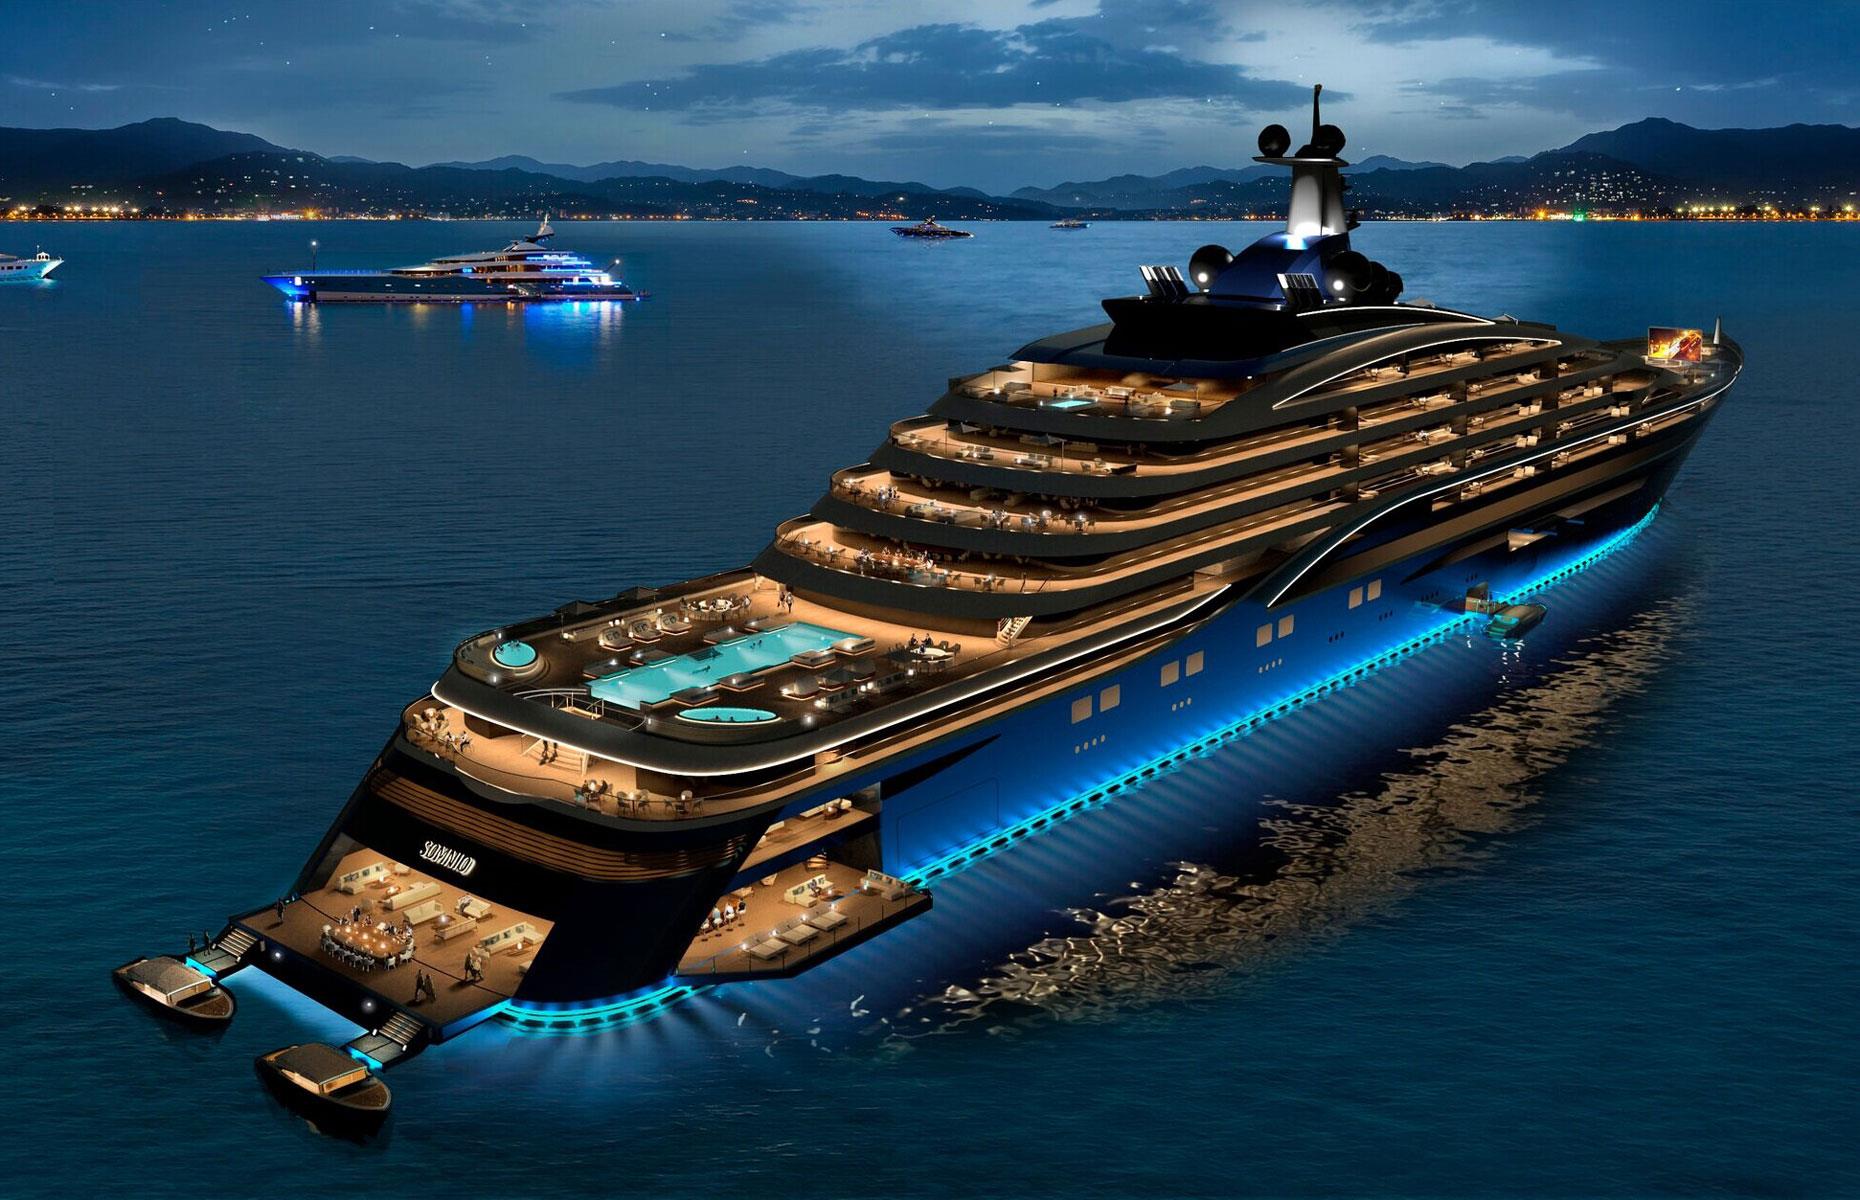 <p>Putting this year's other launches firmly in the shade, <em>Somnio </em>spans a colossal 728 feet, making it the largest superyacht ever built.</p>  <p>The world's first "yacht-liner," this $600 million floating palace for the mega-rich is billed as "the most exclusive address in the world" and will cruise the planet's iconic yachting destinations, from Monaco to French Polynesia.</p>  <p><em>Somnio </em>features 39 luxe private residences and a wealth of "six-star" amenities, including an enormous resort-style swimming pool, premium spa, opulent movie theater, gourmet restaurants, 10,000-bottle wine cellar, and a library.</p>